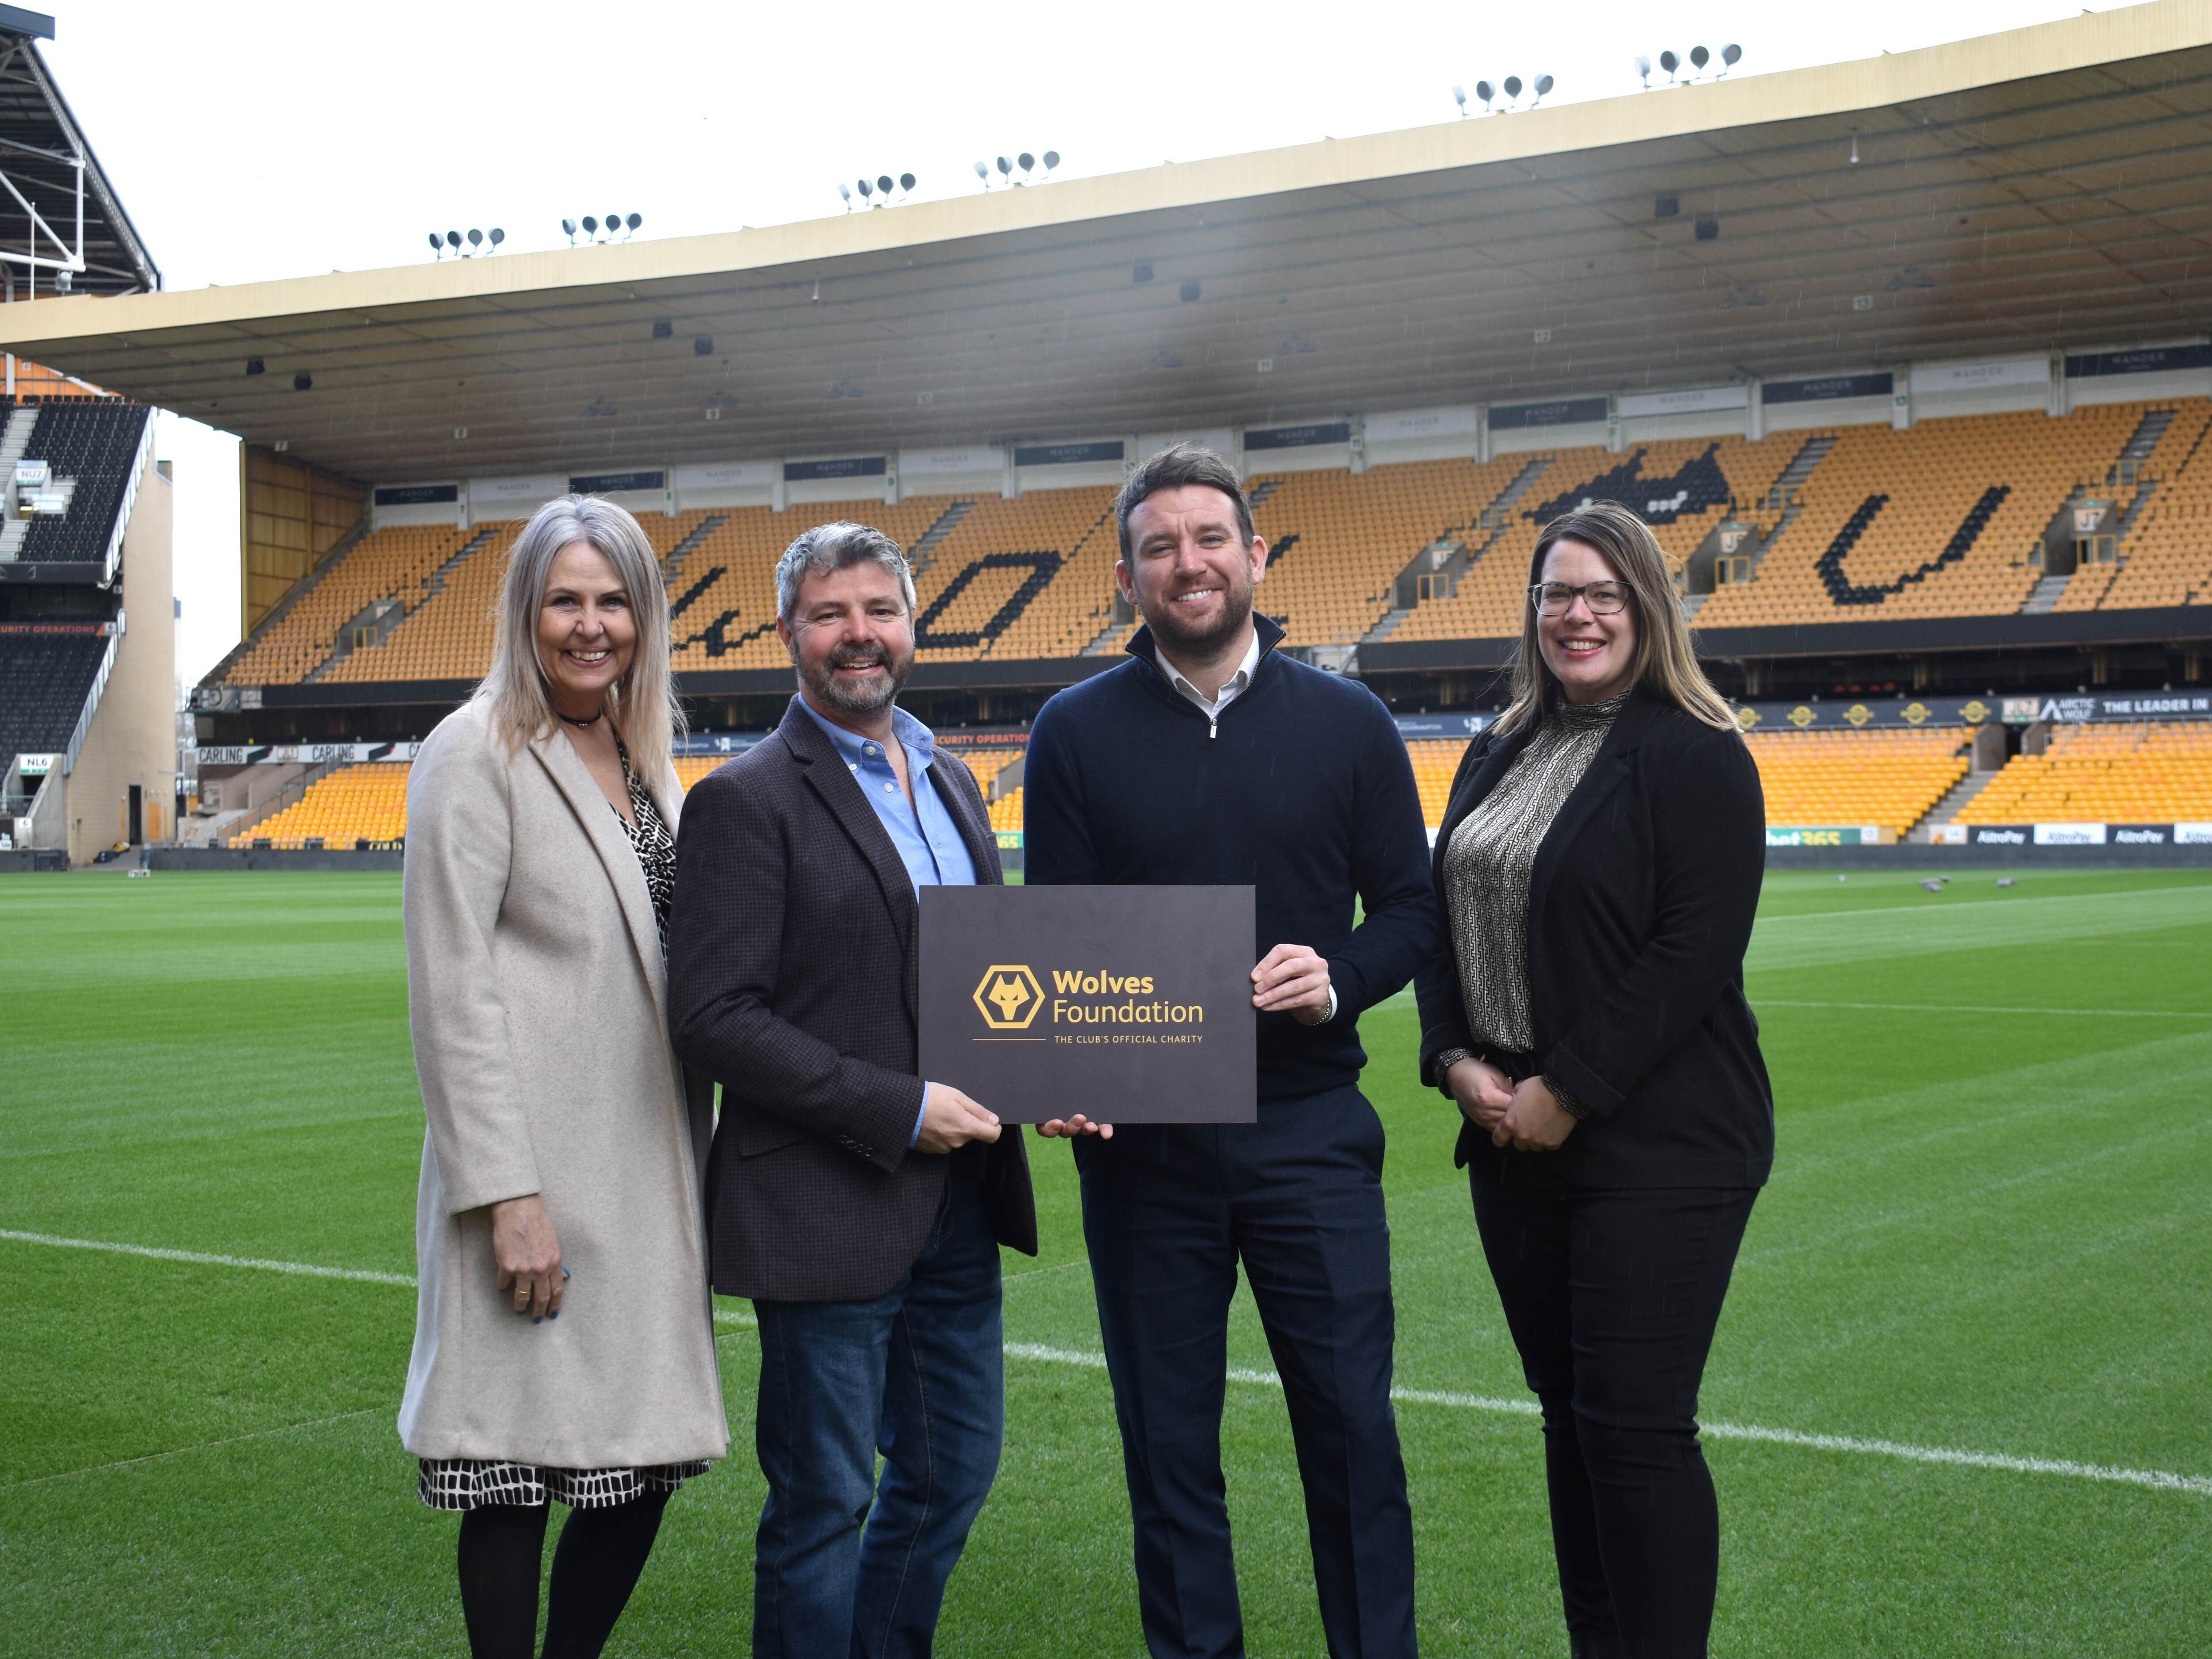 Another year pledged for the Wolves Foundation
